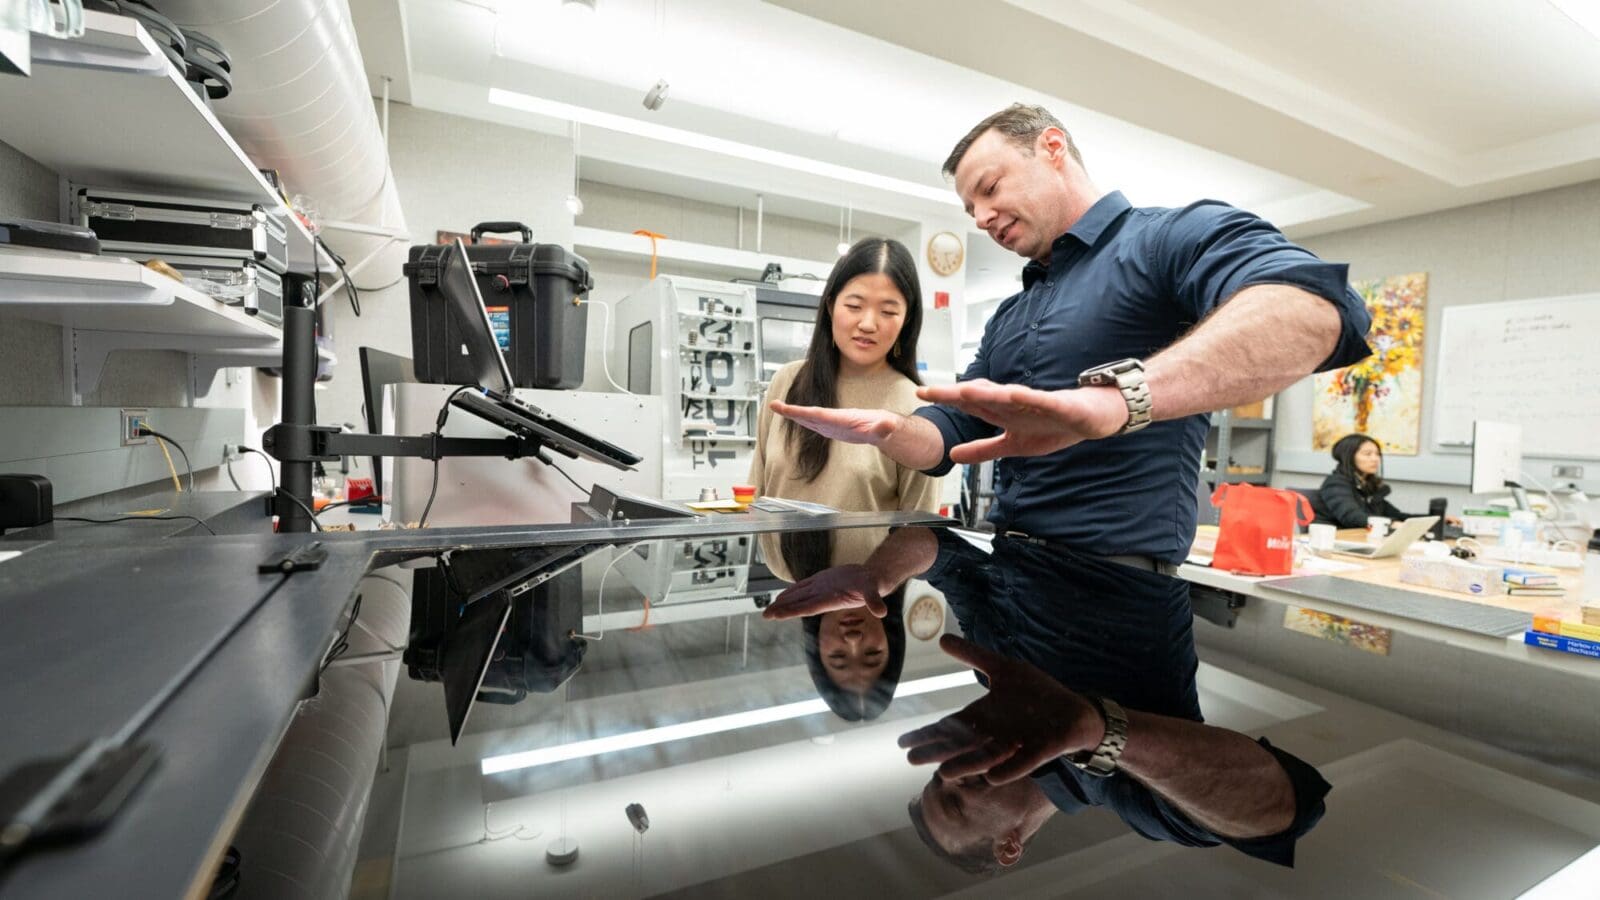 Male researcher flattens his hands above glass-topped machine while female researcher looks on